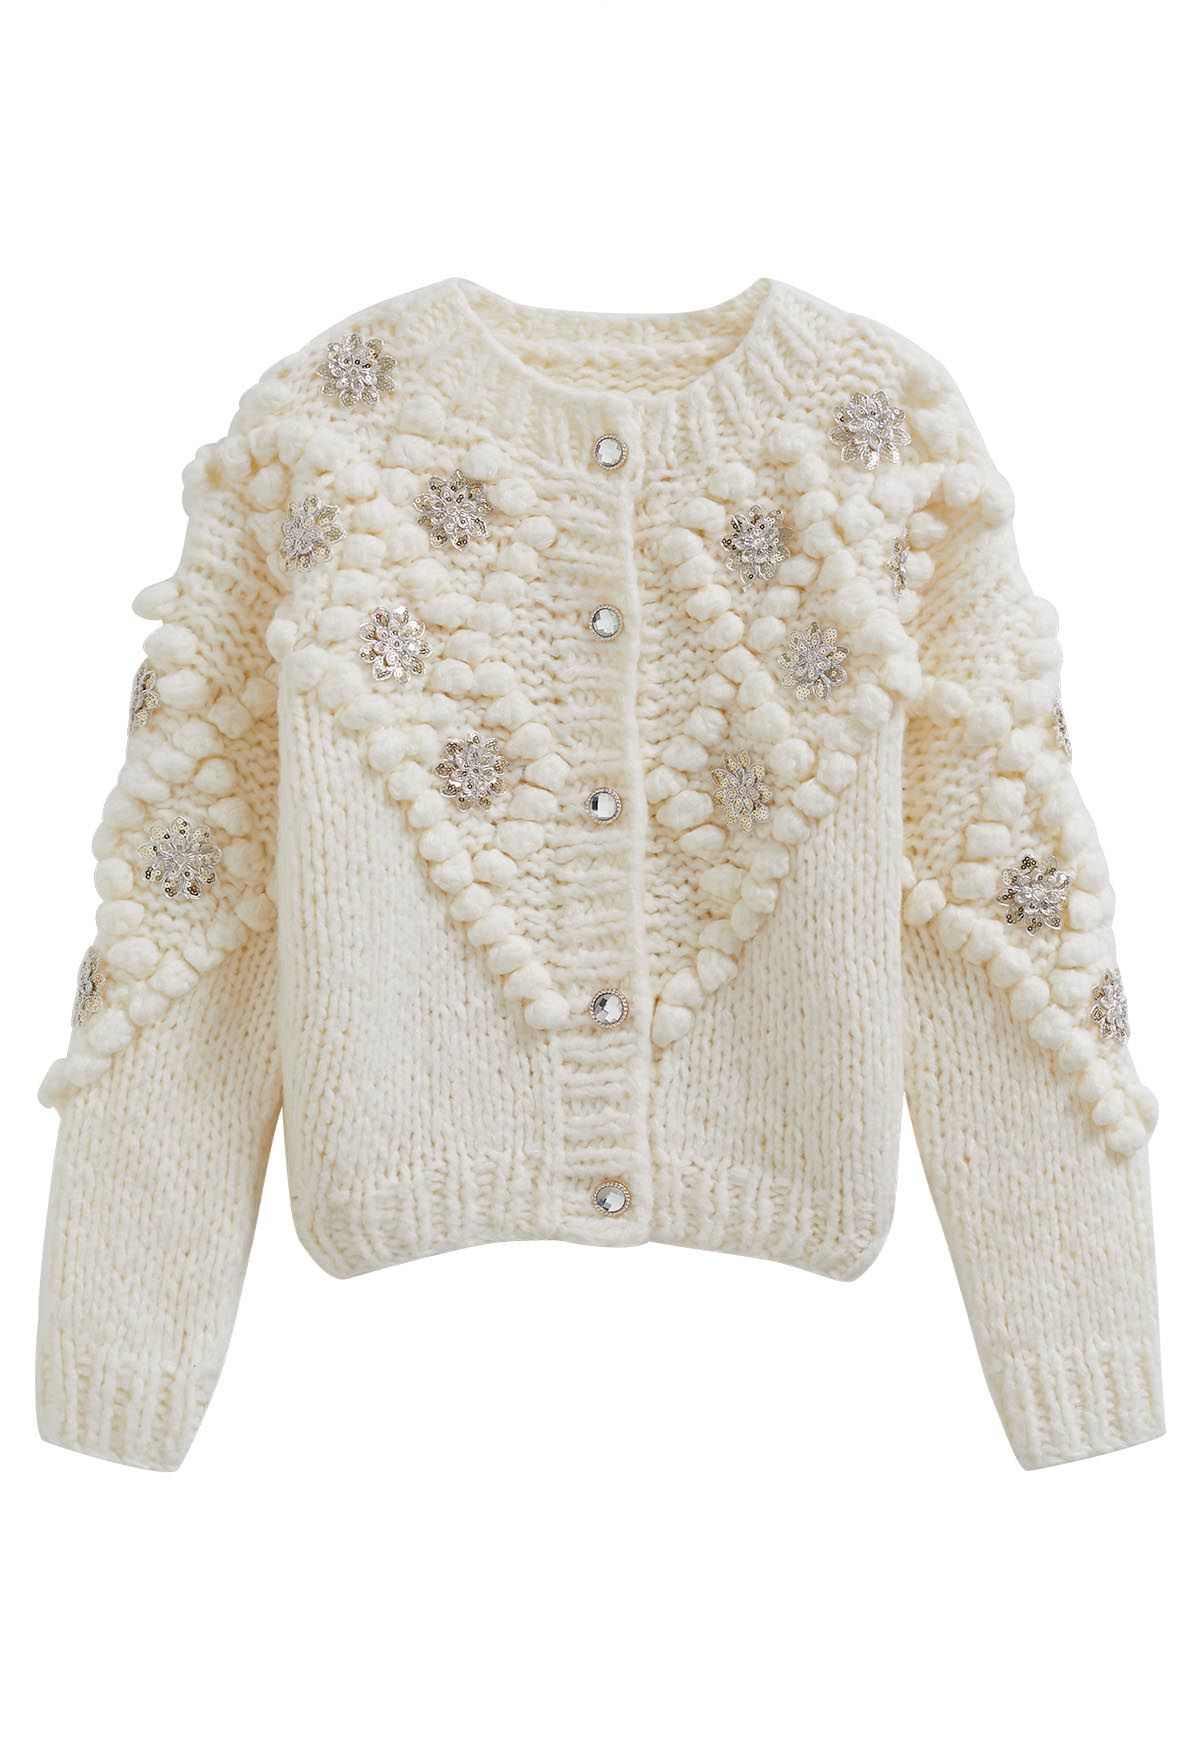 Sequined Flower Pom-Pom Knit Cardigan - Retro, Indie and Unique Fashion